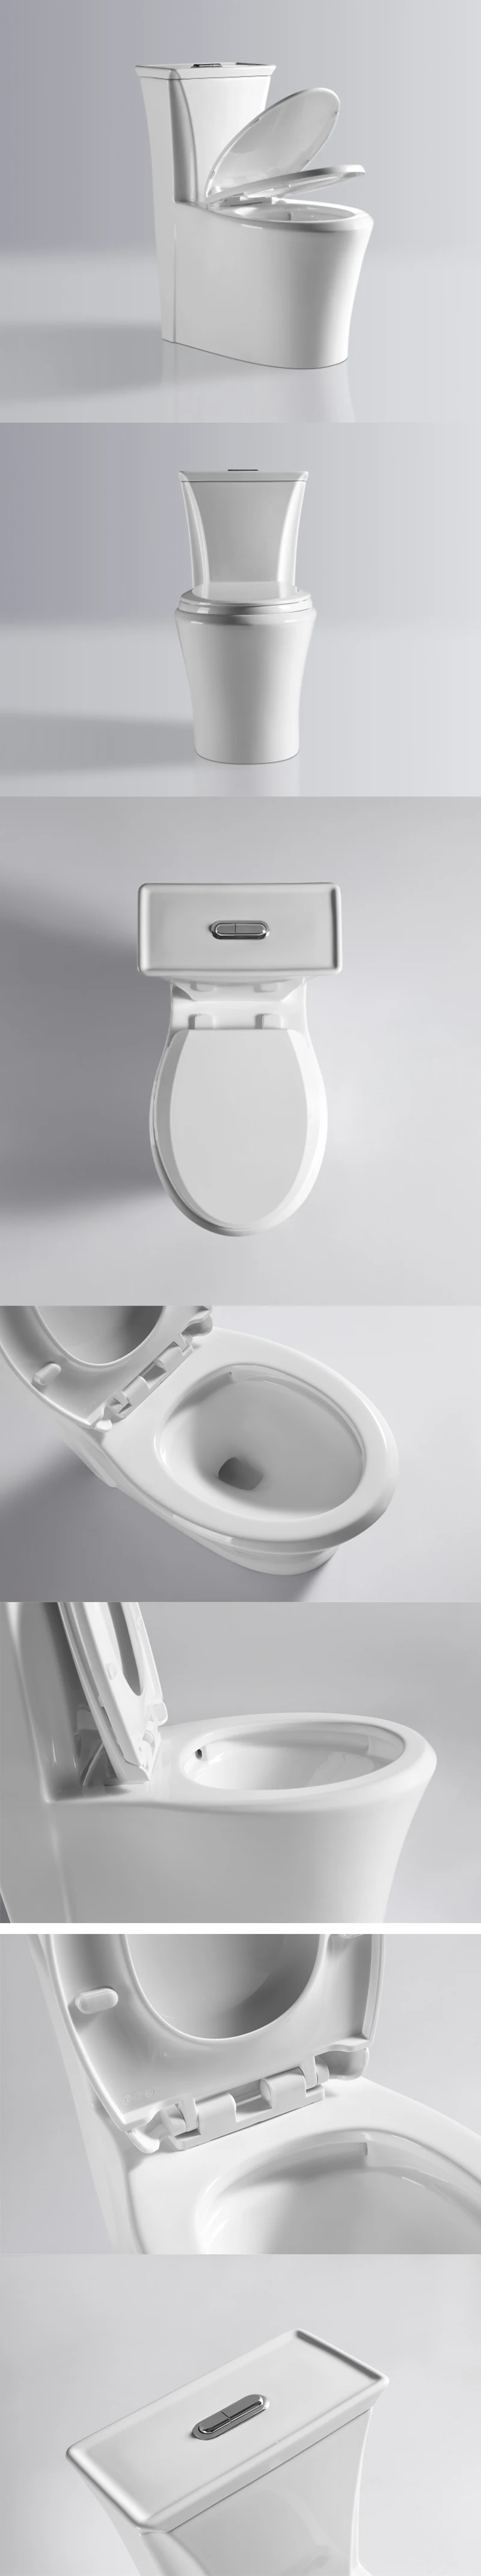 China factory sanitary ware ceramic elongated WC siphonic flushing white cheap bathroom new model toilet